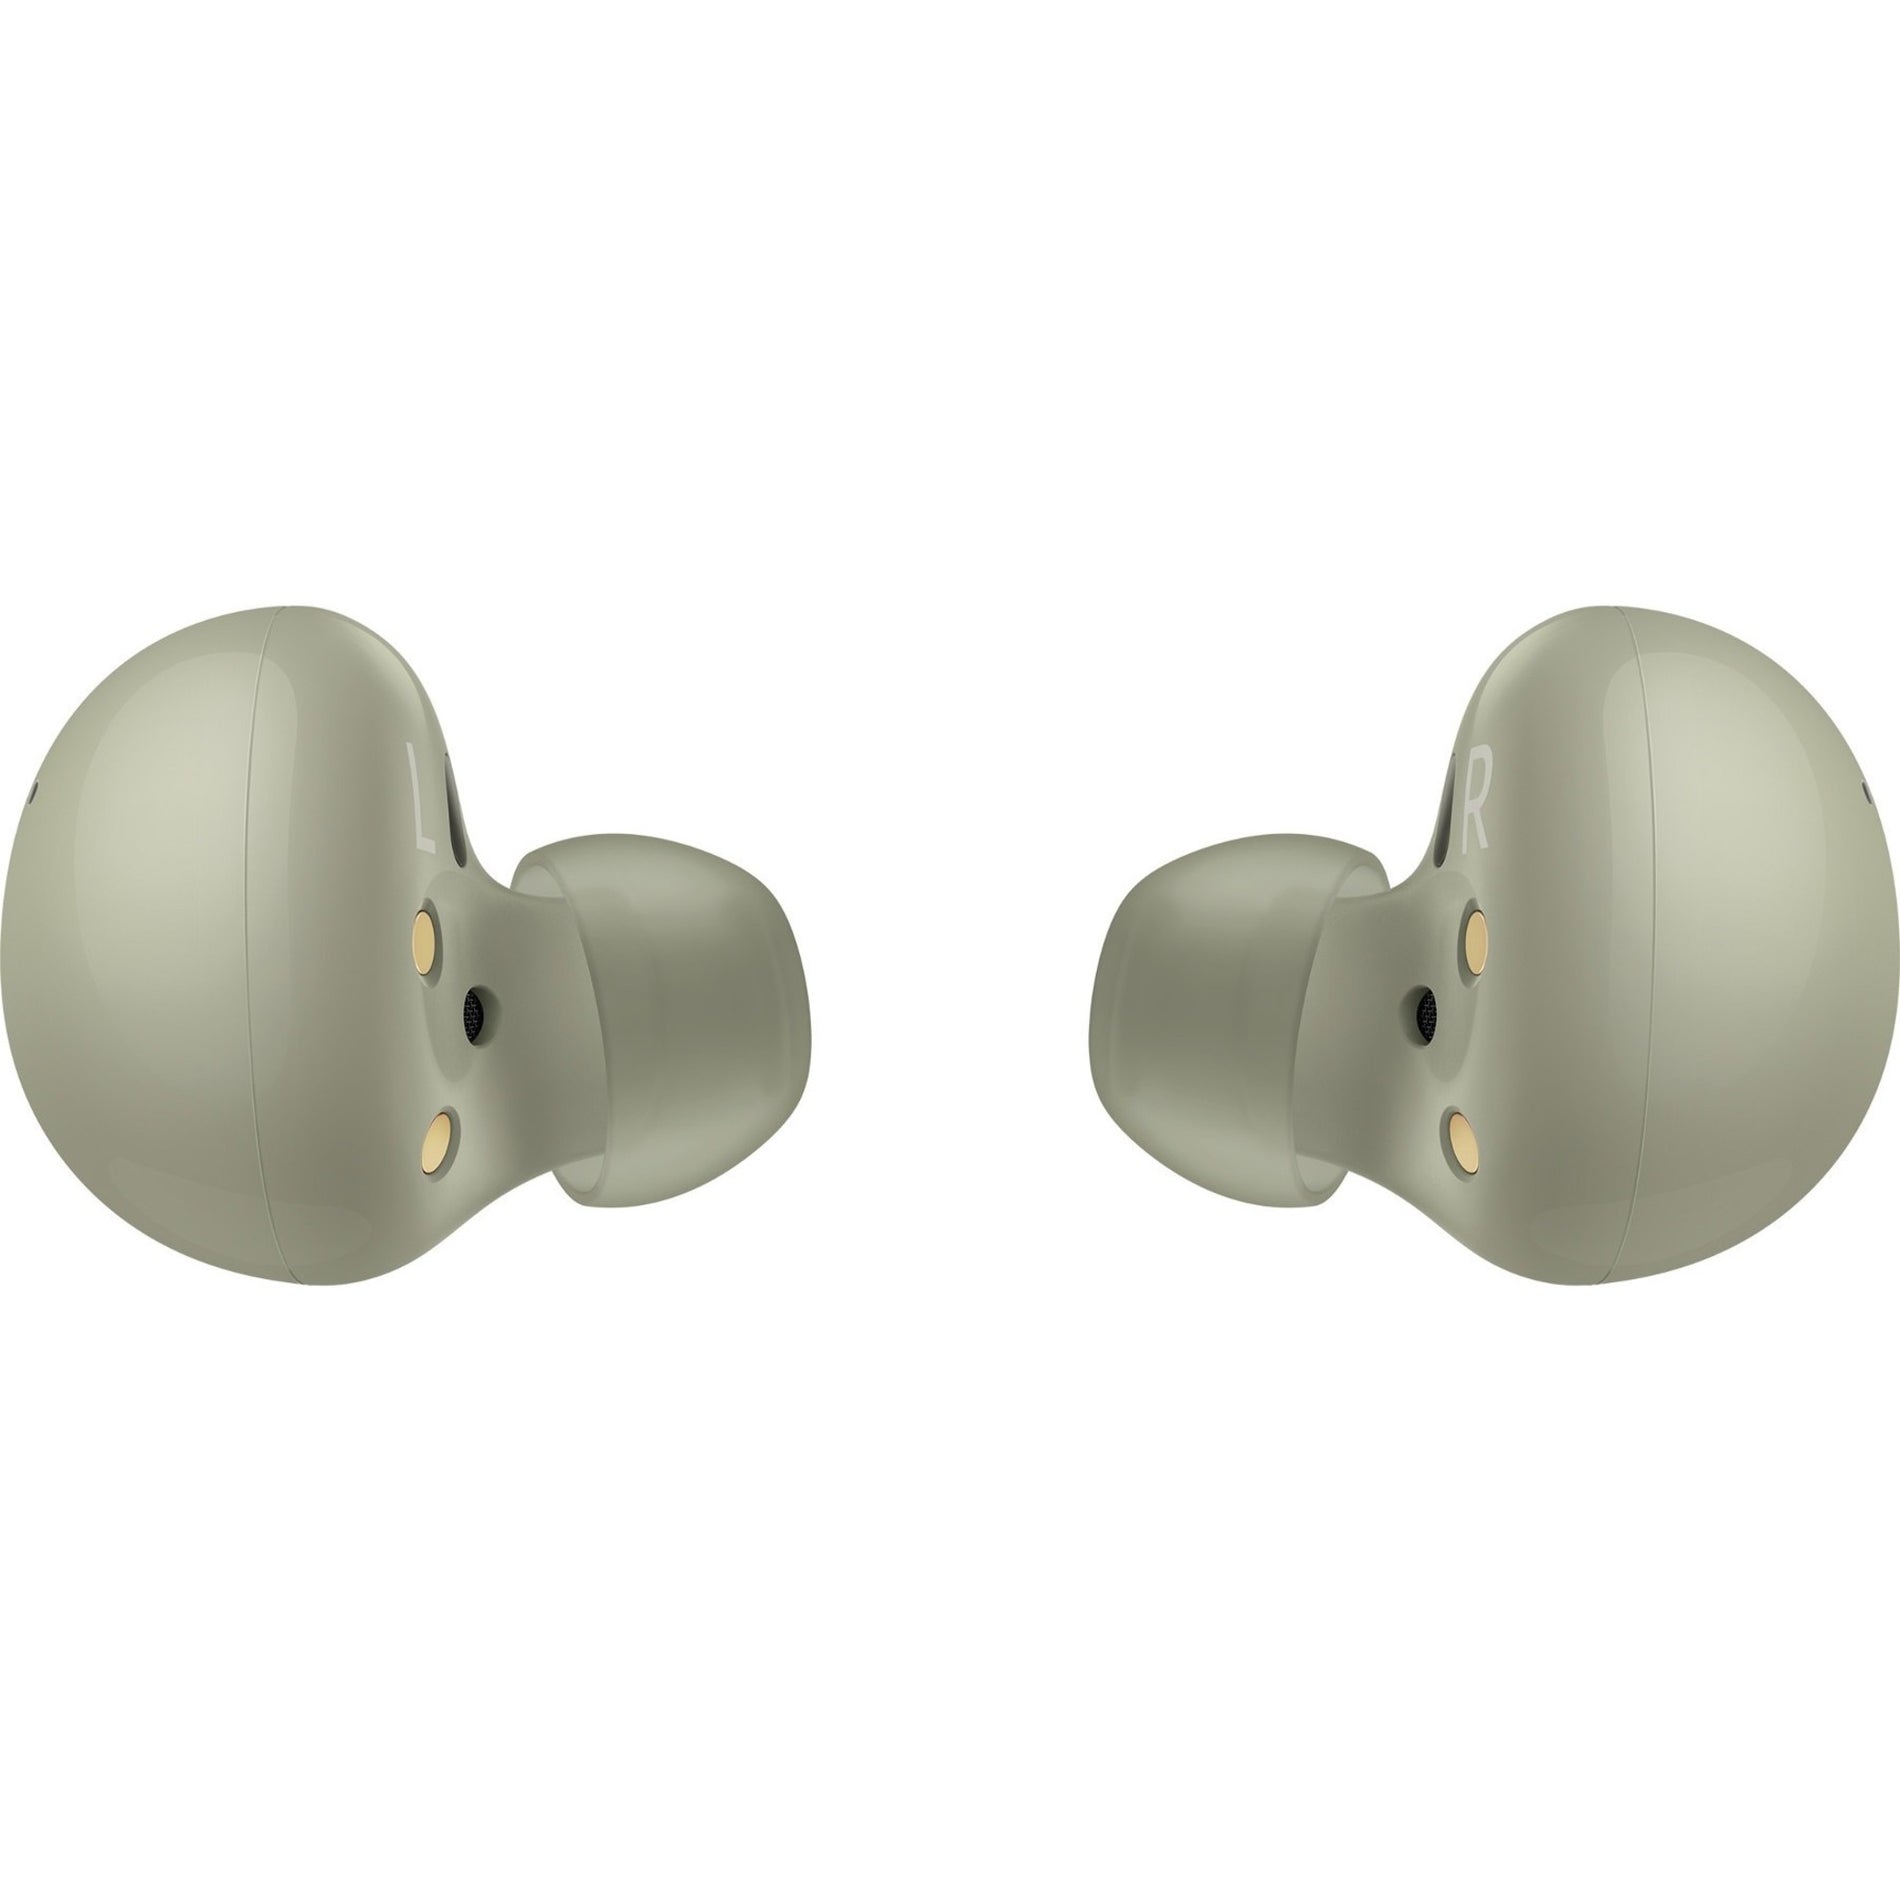 Samsung SM-R177NZGAXAR Galaxy Buds2, True Wireless Earbuds with Active Noise Canceling, Olive